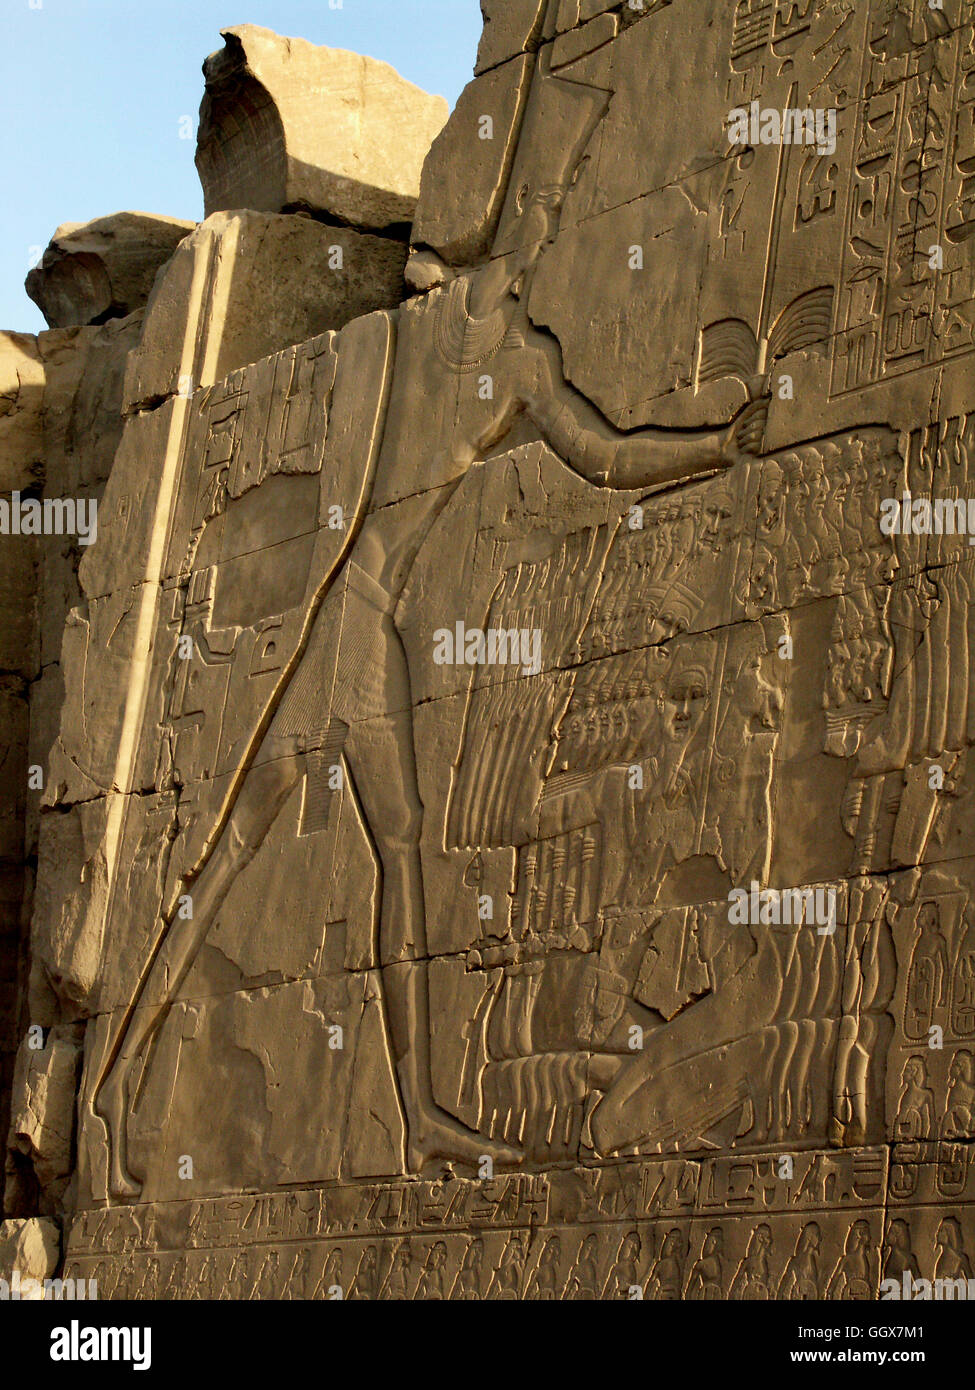 Wall relief of pharaoh Ramesis IV smiting enemies in the courtyard of the Temple of Karnak at Luxor – Egypt. Stock Photo